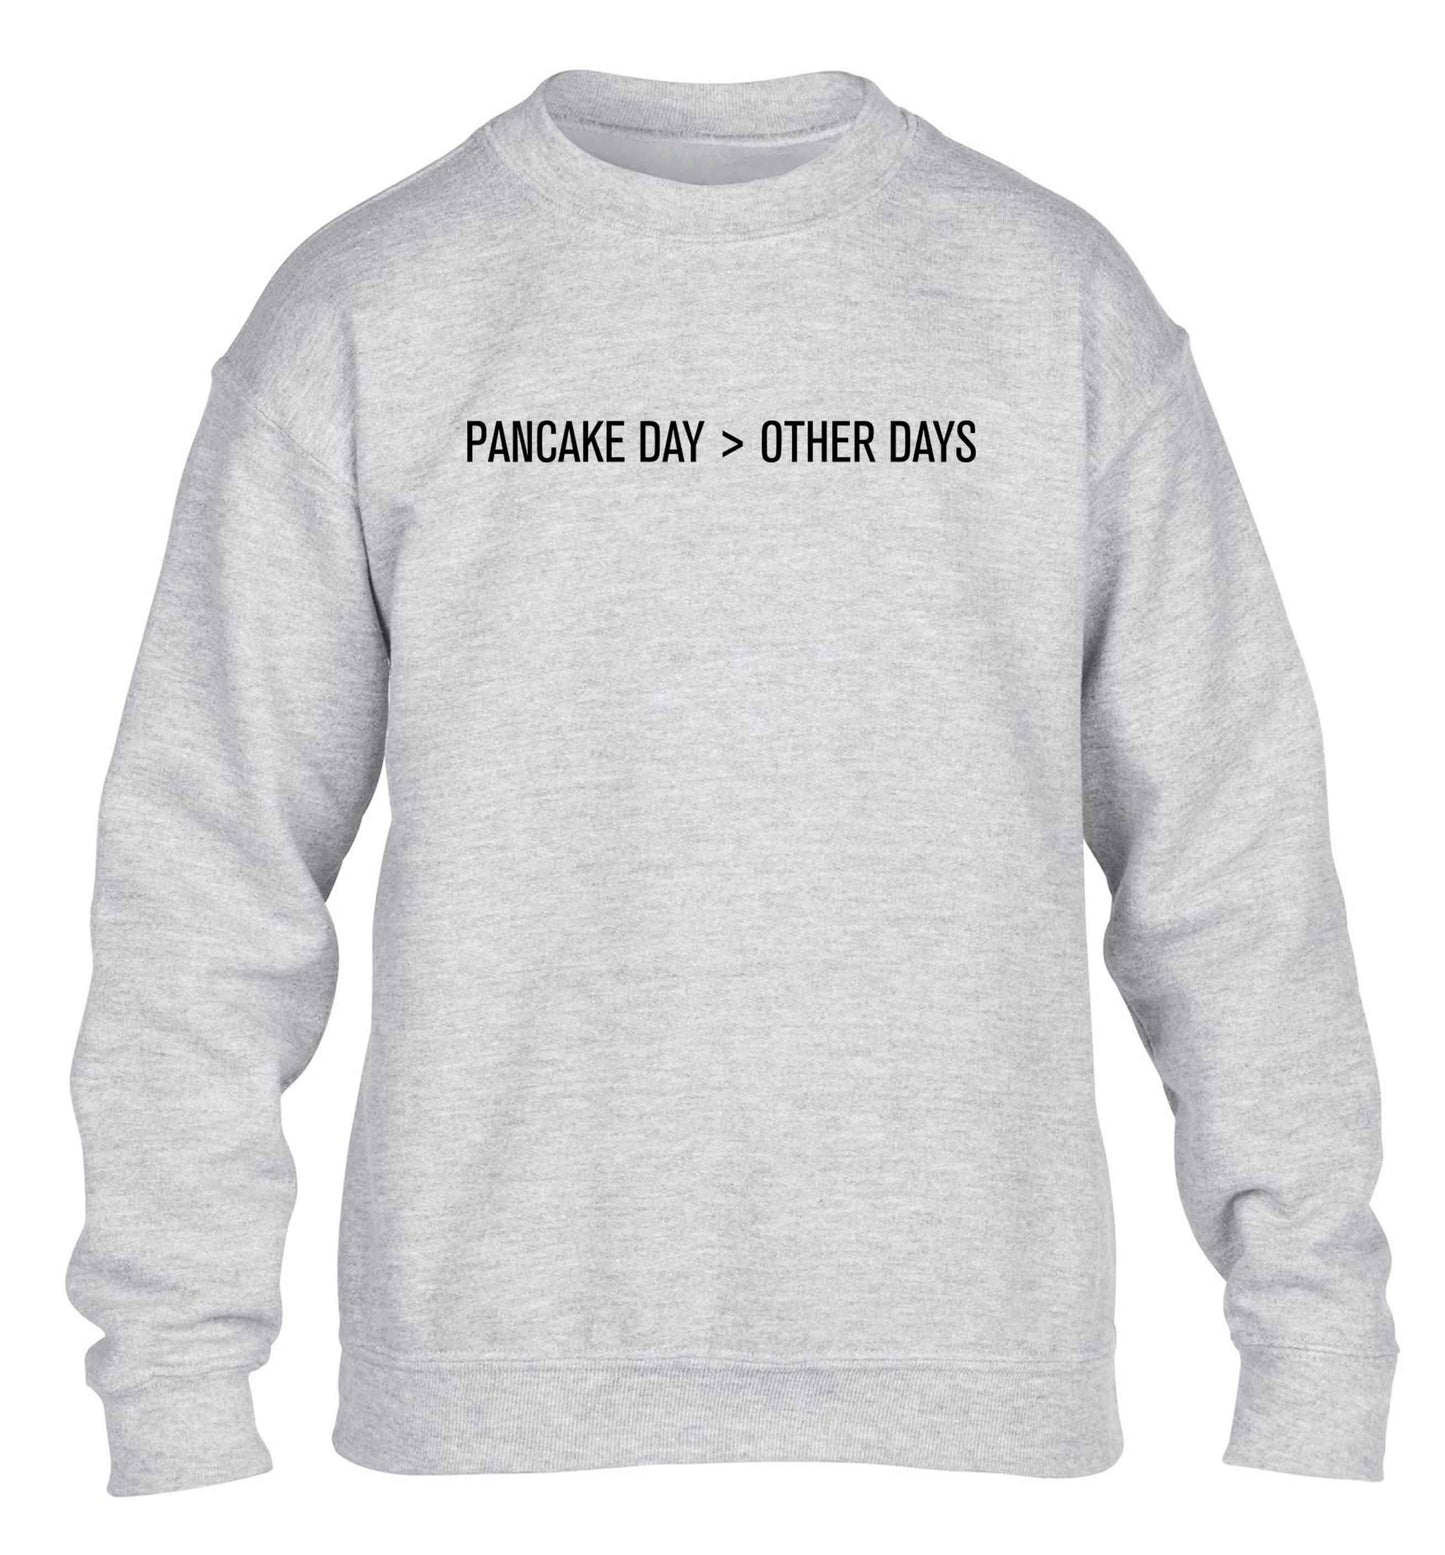 Pancake day > other days children's grey sweater 12-13 Years